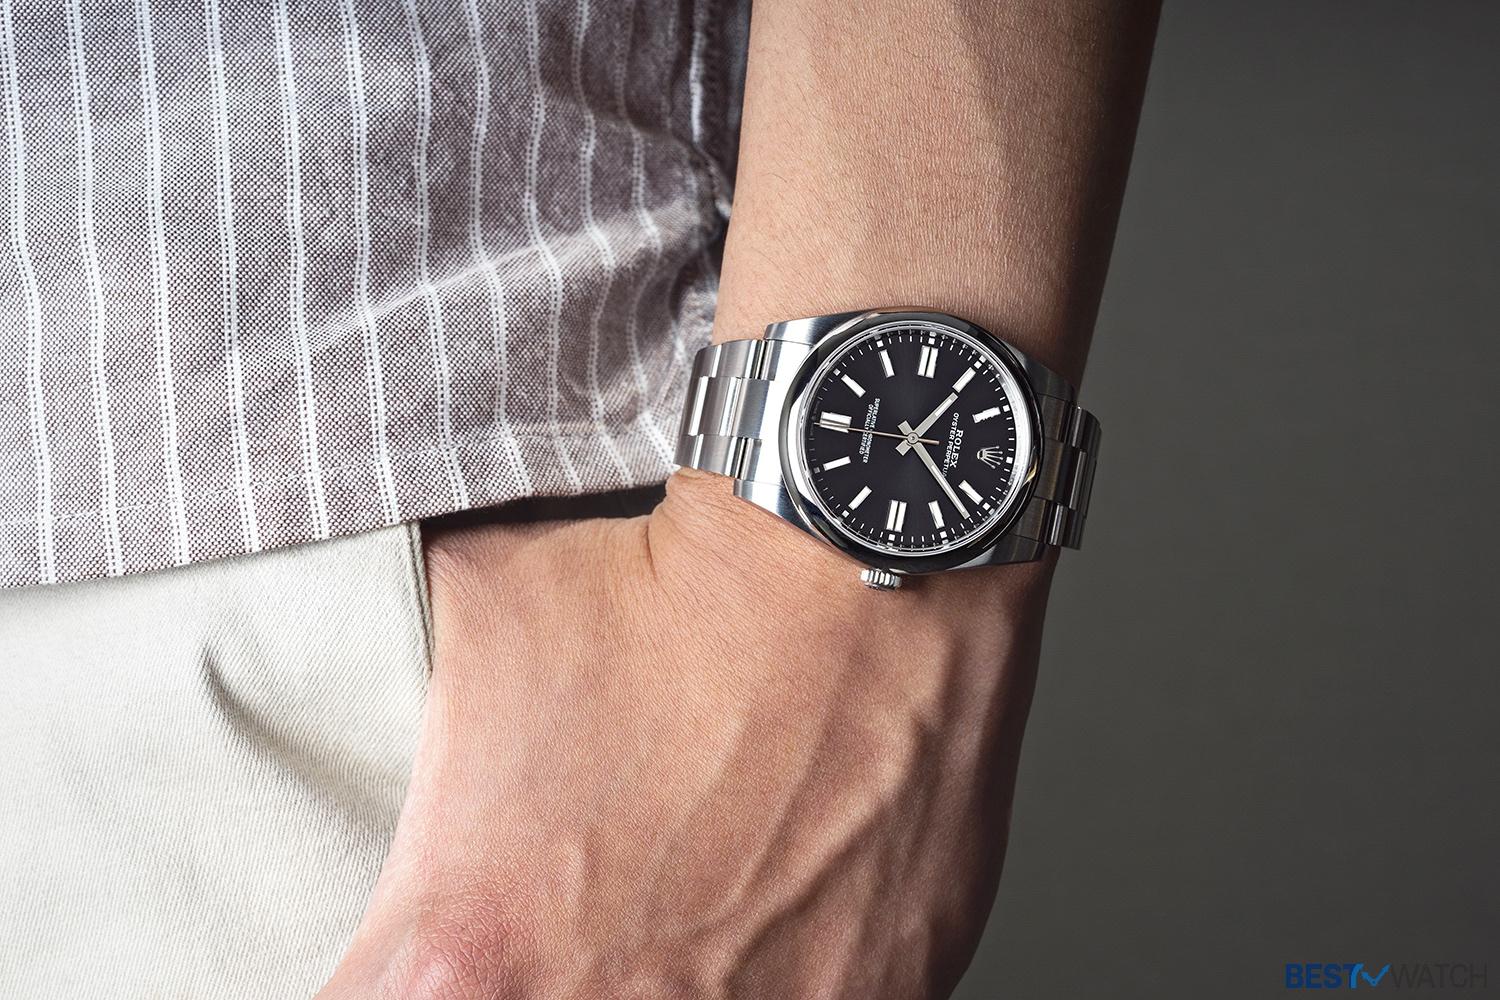 The Complete Buying Guide to the Rolex Oyster Perpetual